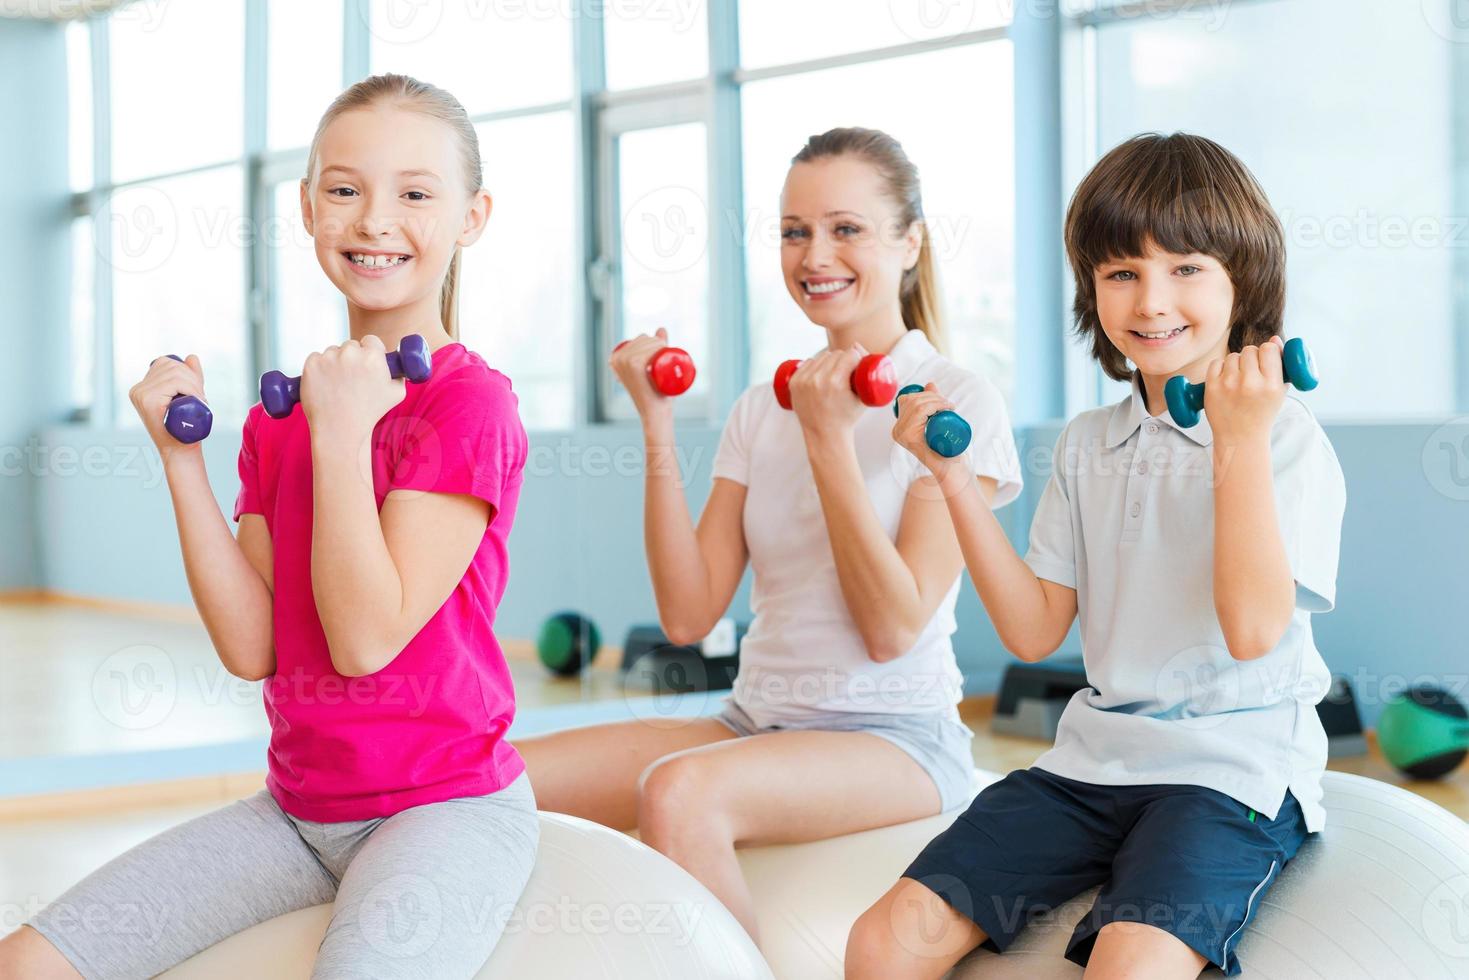 Keeping our bodies fit. Cheerful mother and two children exercising with dumbbells in health club while sitting on the fitness balls together photo